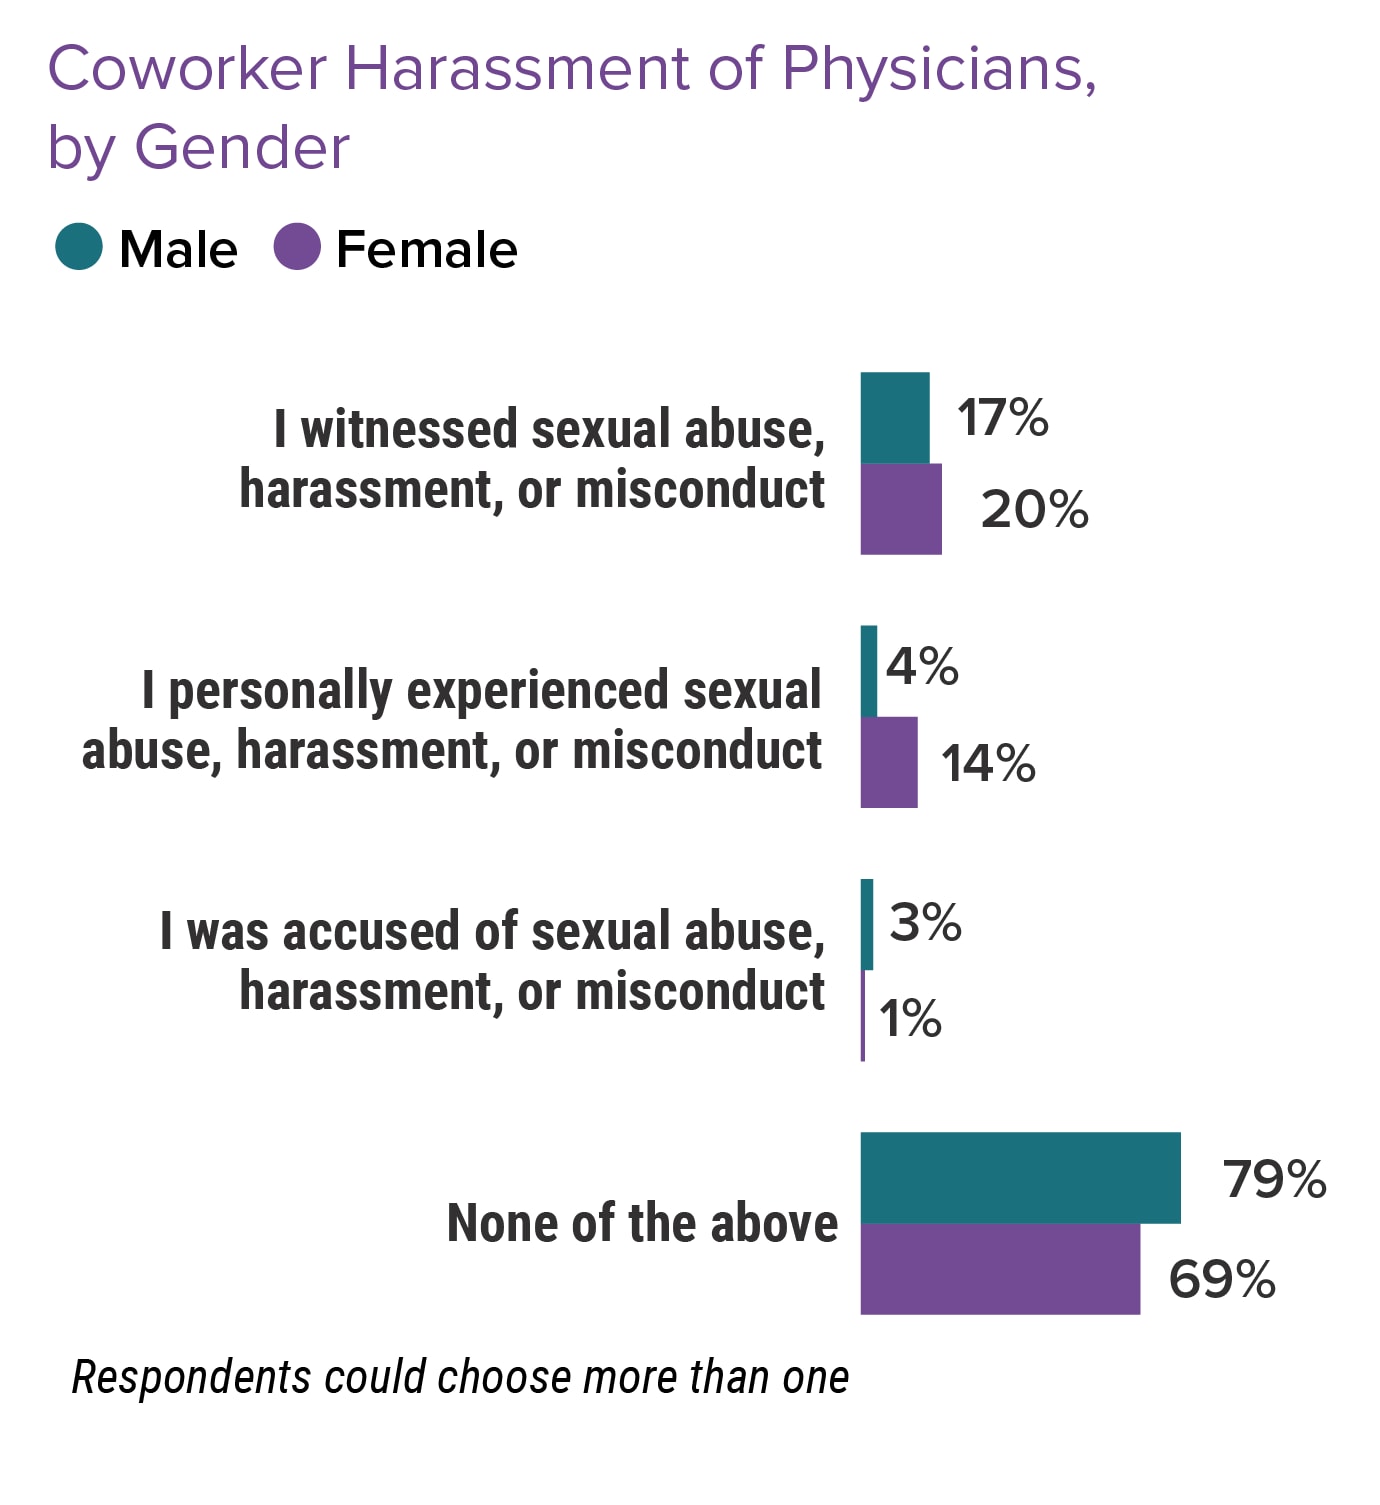 Sexual Harassment of Physicians: When Patients or Coworkers Cause Problems